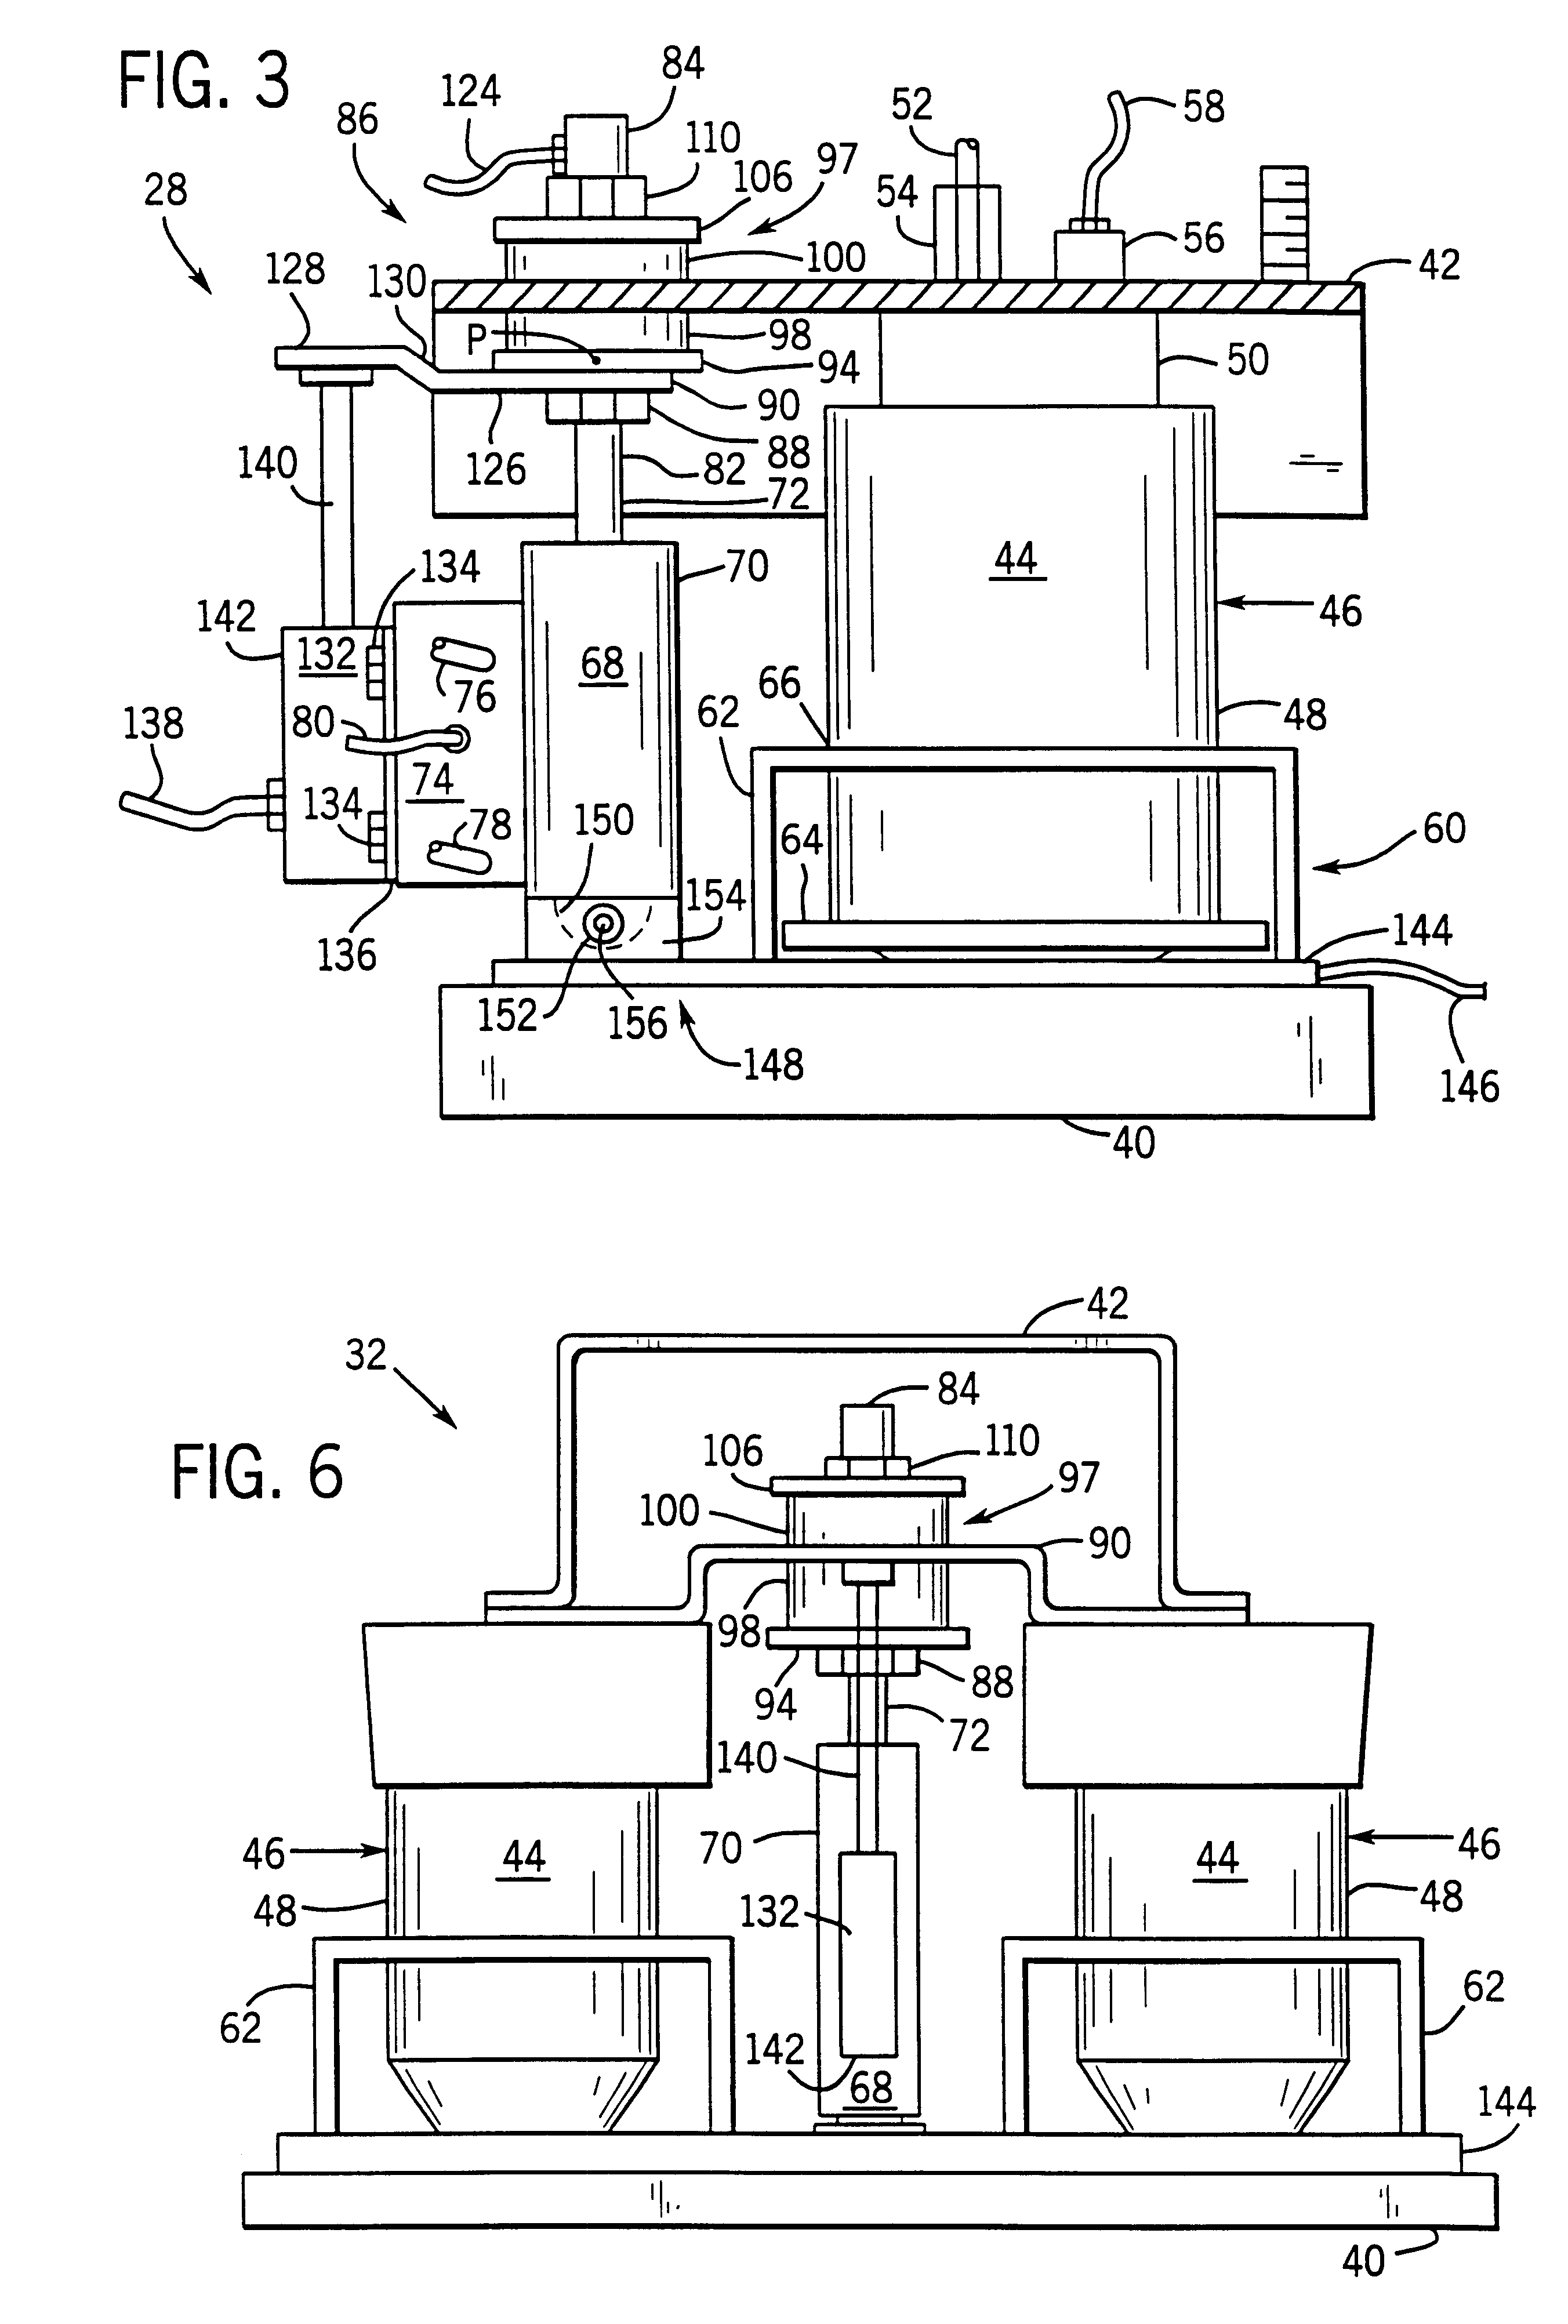 Apparatus for facilitating reduction of vibration in a work vehicle having an active CAB suspension system